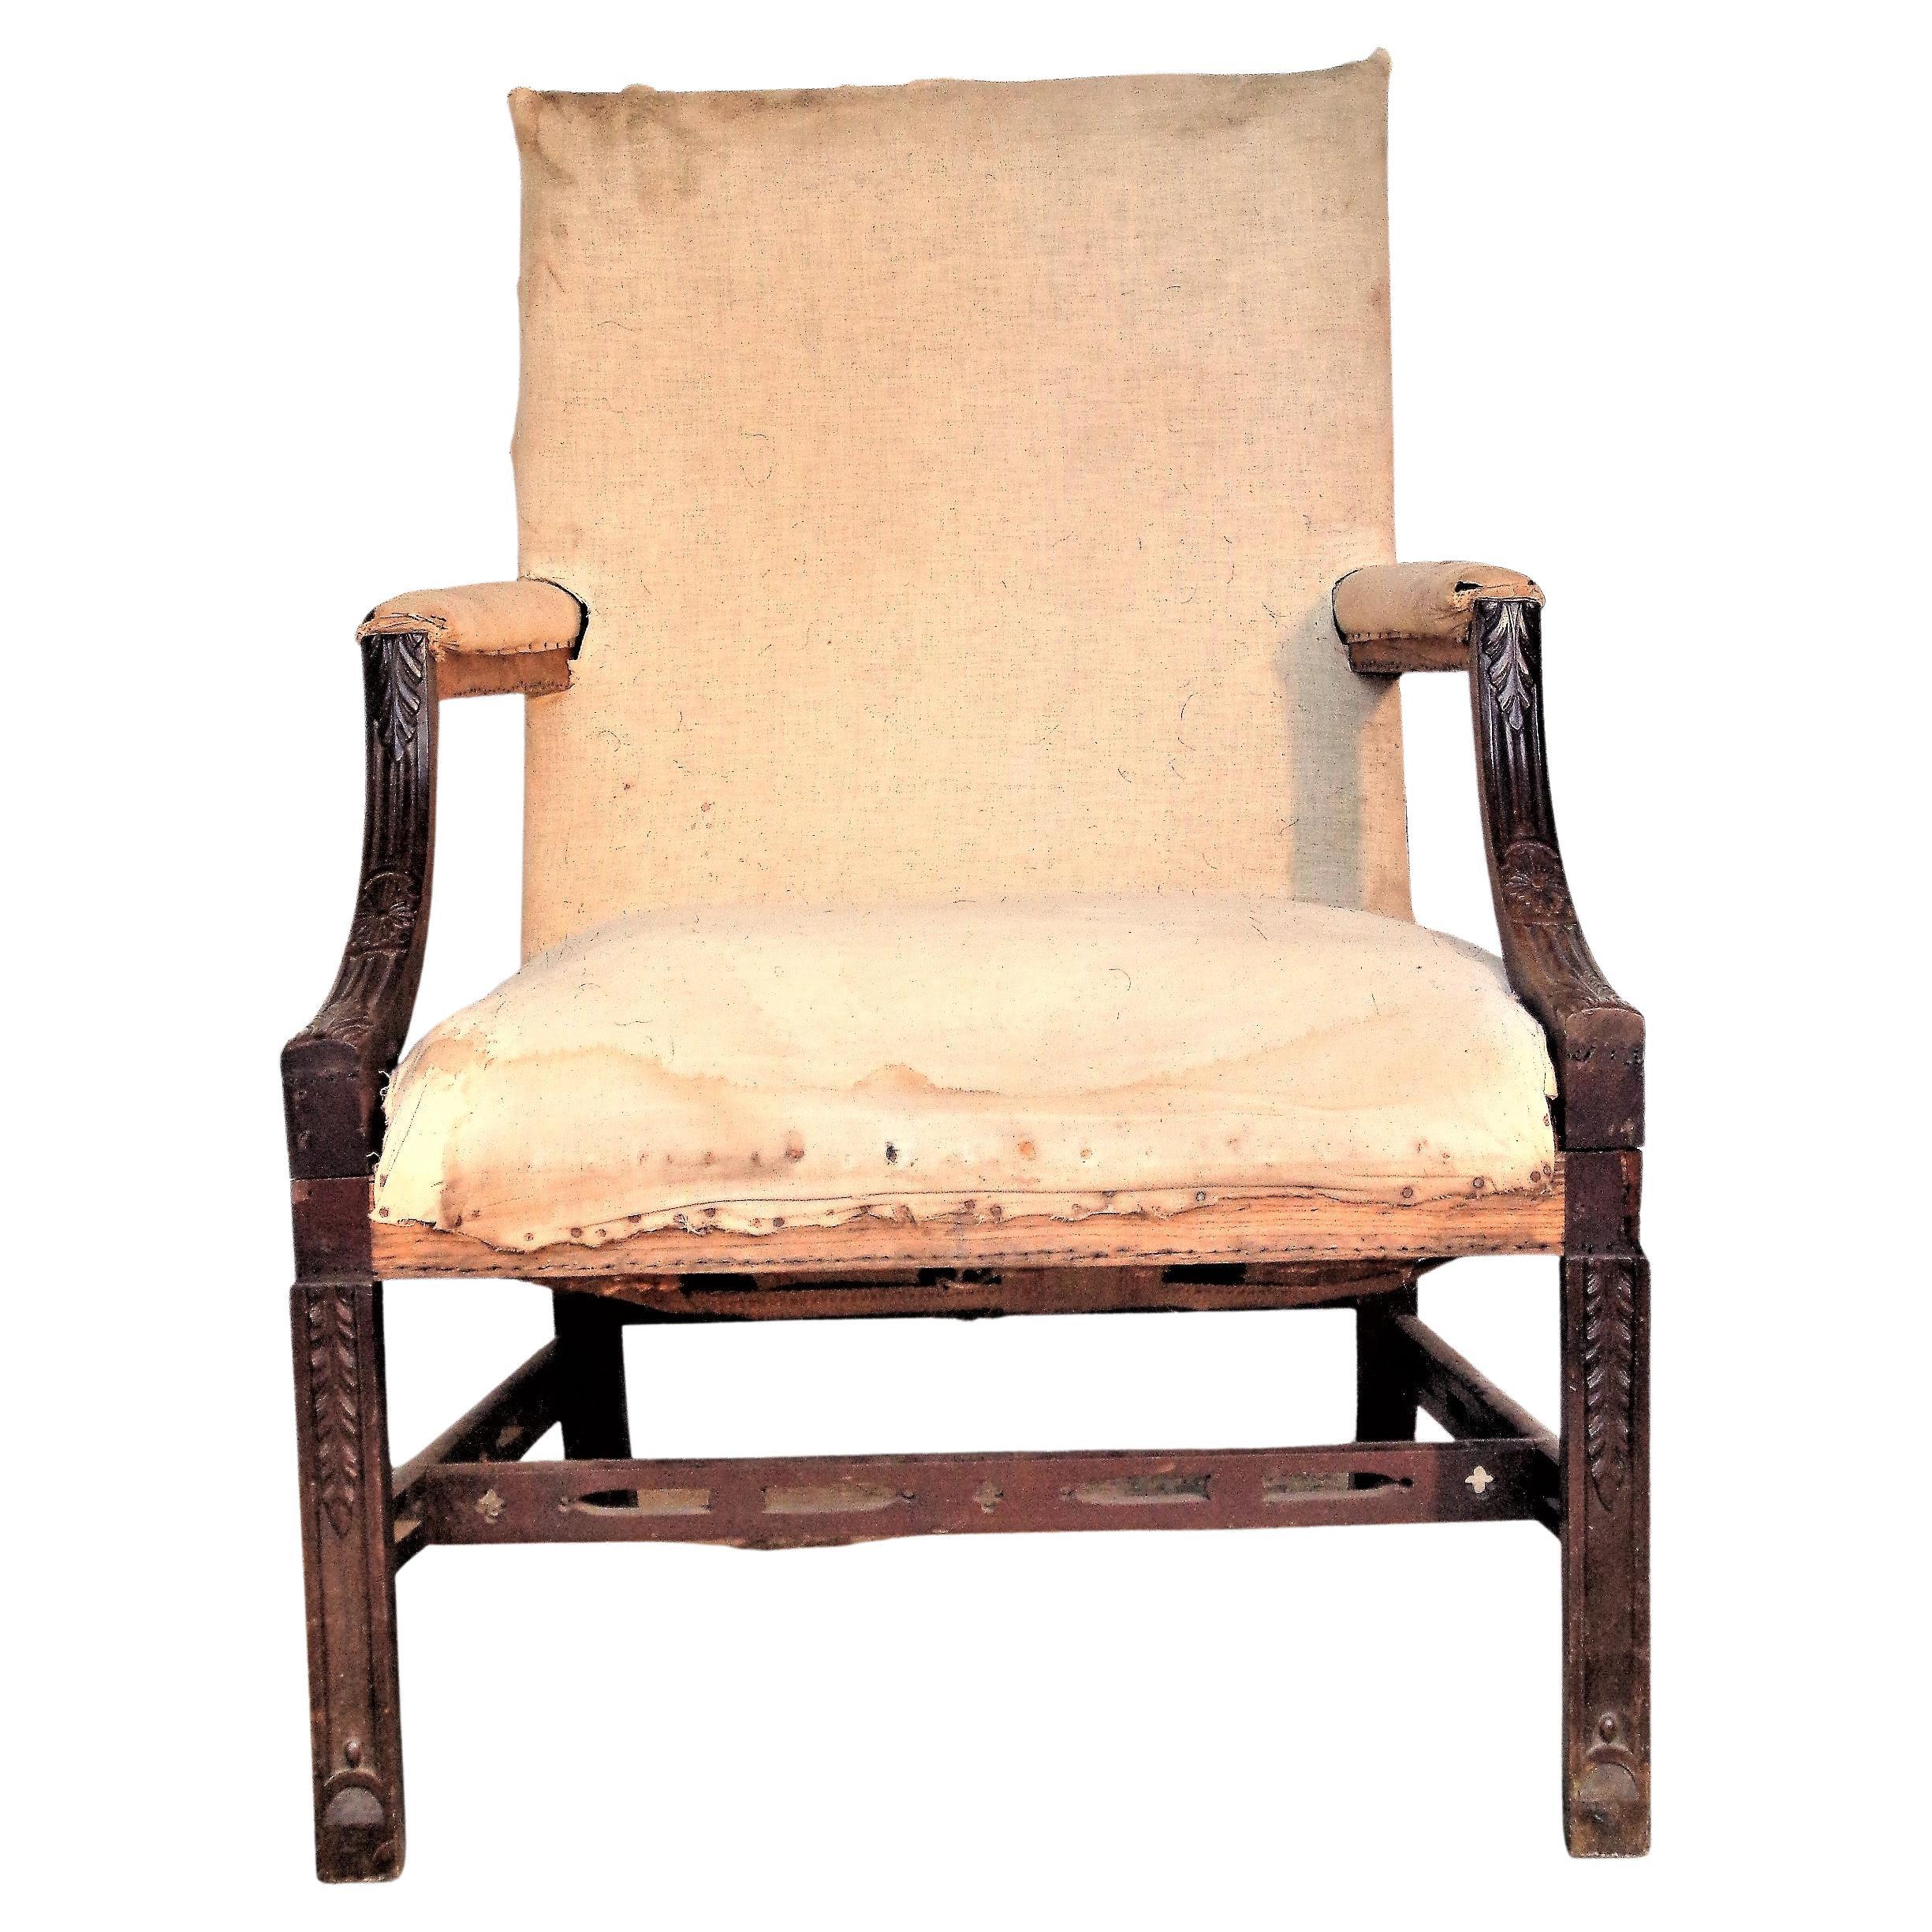 Antique George III style lolling chair with finely hand carved details on front arms, legs and stretchers. Chair is in all original deconstructed condition, showing the old muslin / canvas webbing / horsehair stuffing and framework. Most likely